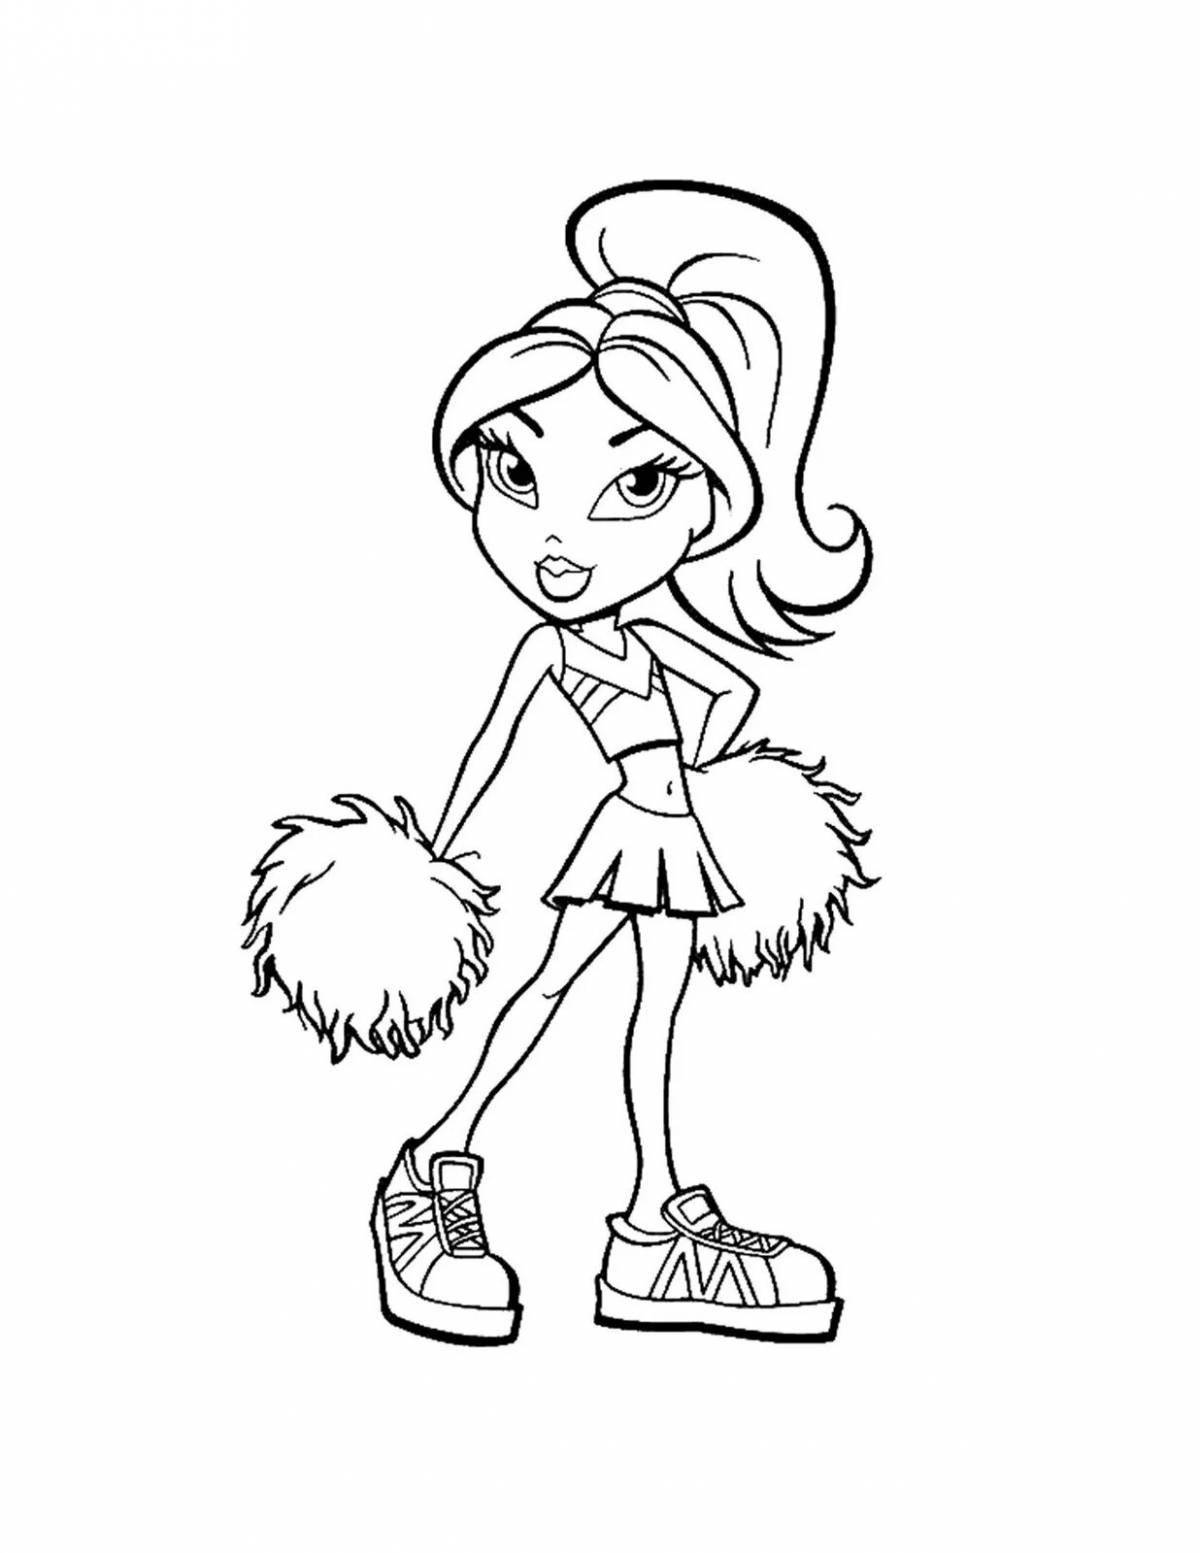 Animated valberis coloring page